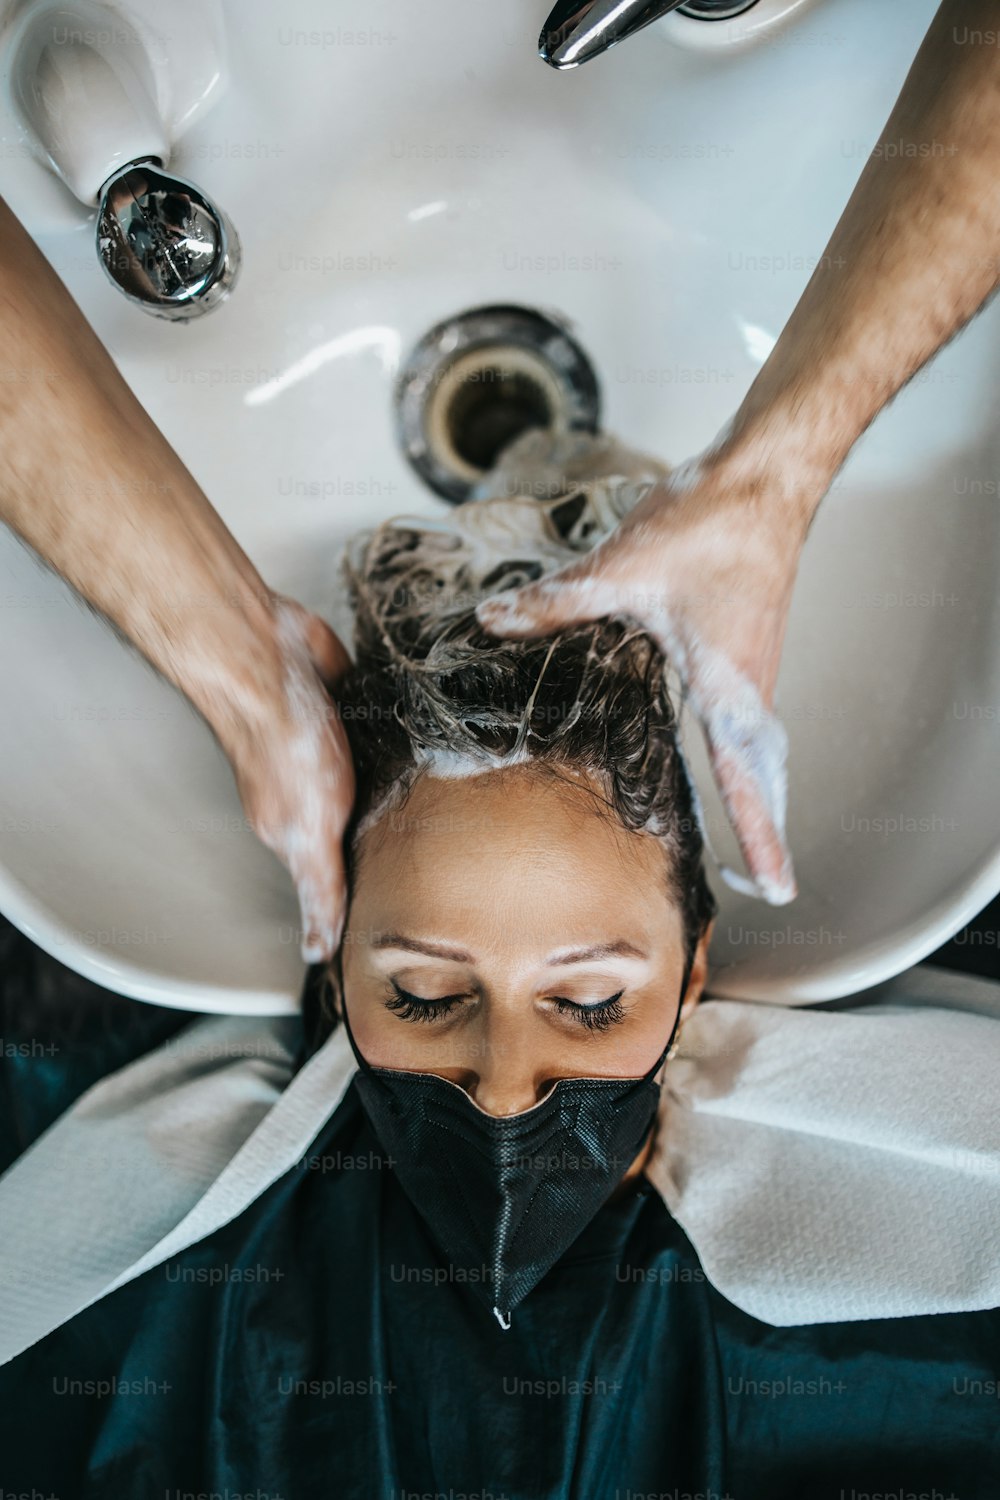 Hairdresser washing hair of a beautiful young adult woman in hair salon. She is wearing protective face mask as protection against virus pandemic.